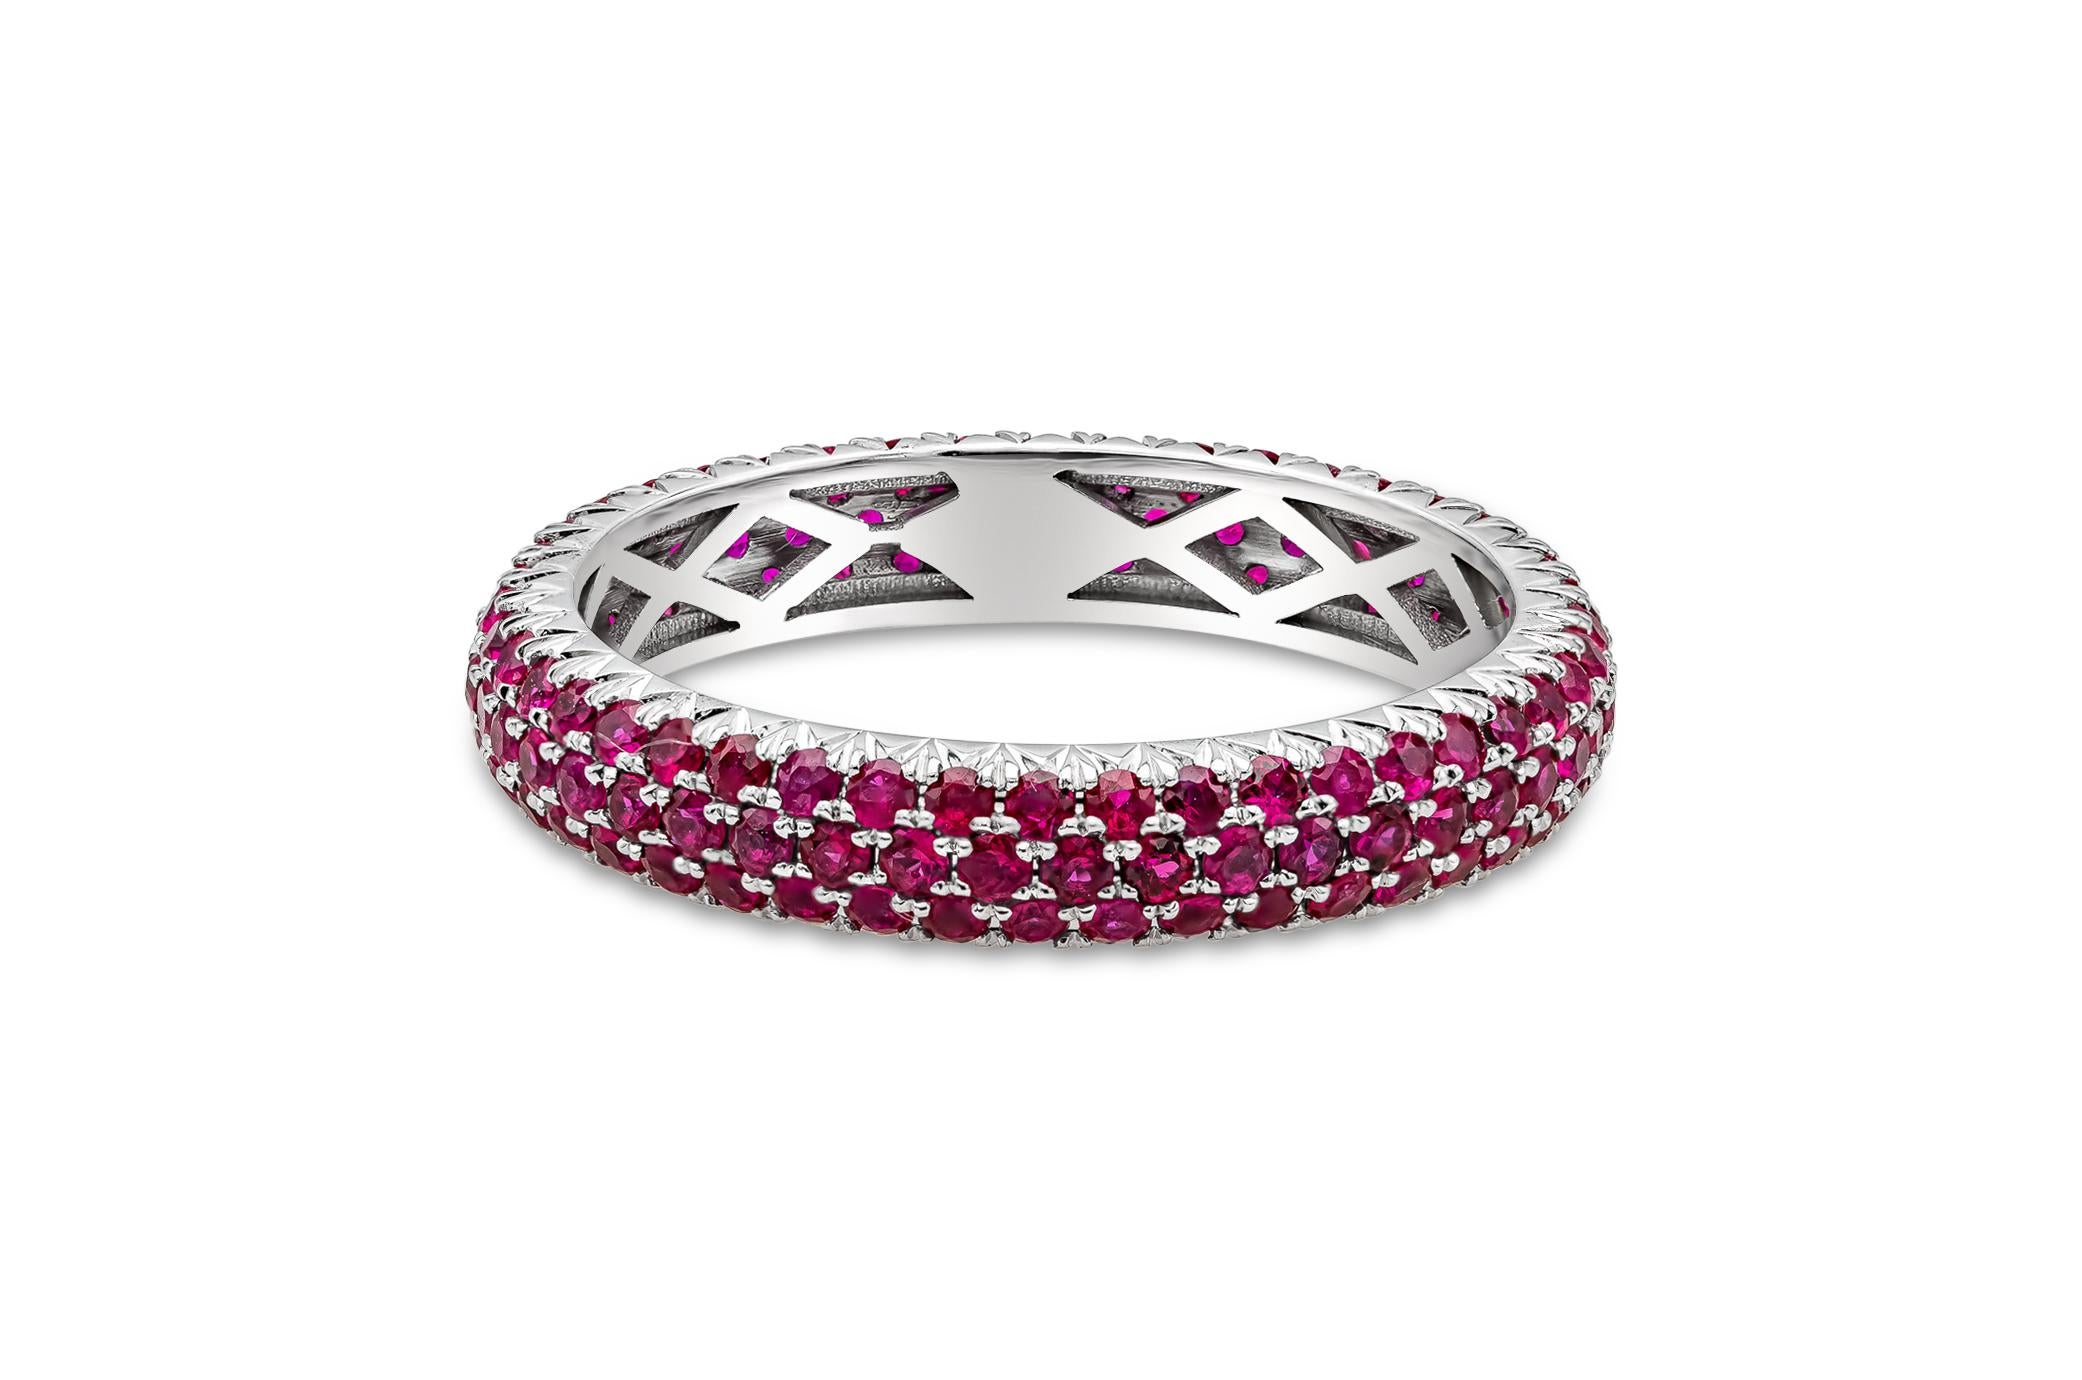 A fantastic and fashionable wedding band showcasing three-rows of vibrant rubies, micro-pave set. Rubies weigh 1.60 carats total. Made with 18K White Gold Size 7.25 US

Roman Malakov is a custom house, specializing in creating anything you can